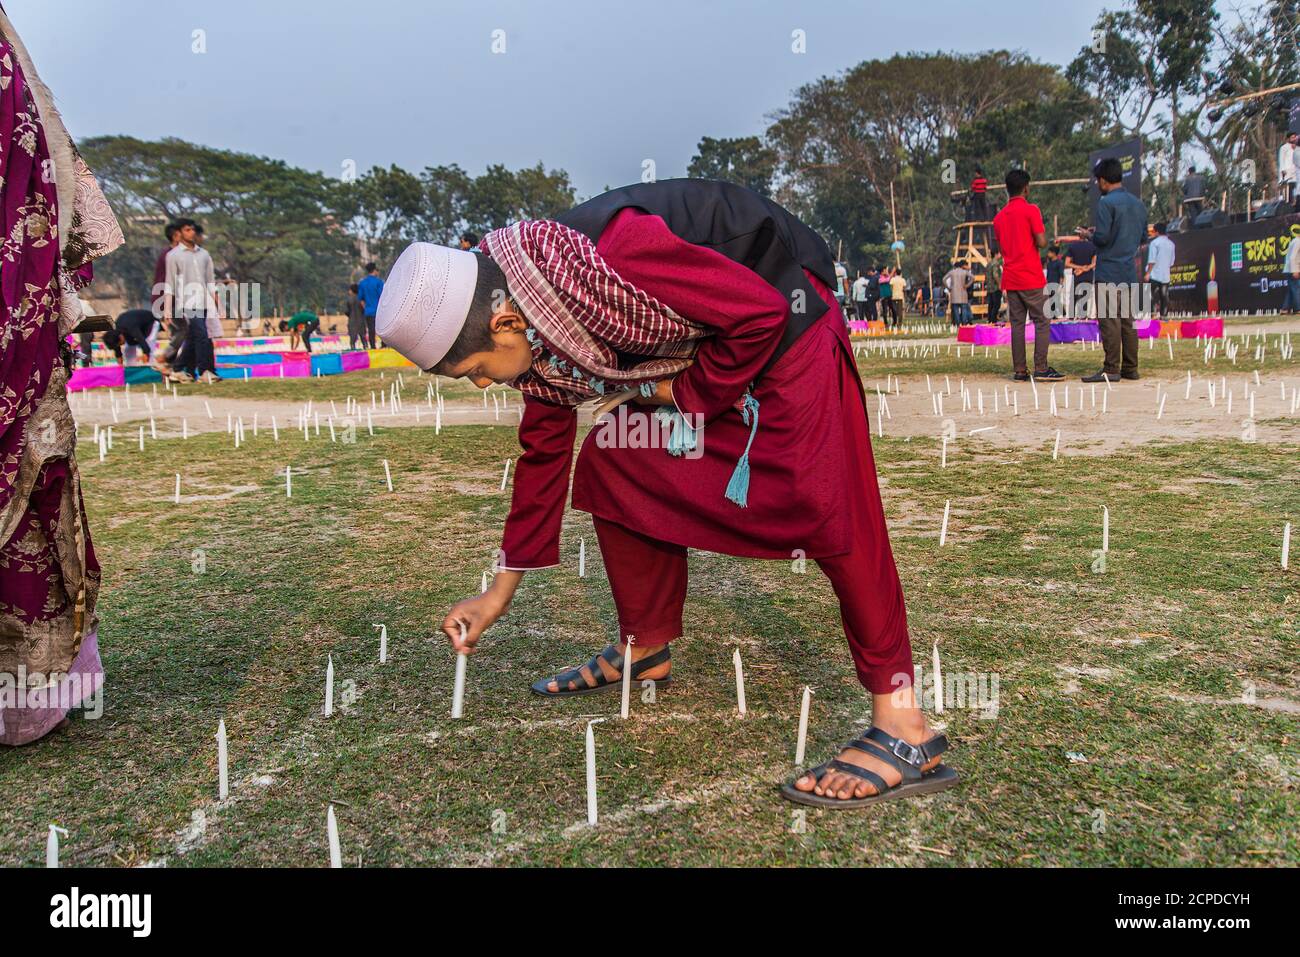 A grand function in remembrance of the martyrs of the language movement, Ekushey Udjapan Committee of Narail arranges one-lakh candles lighting in Kor Stock Photo